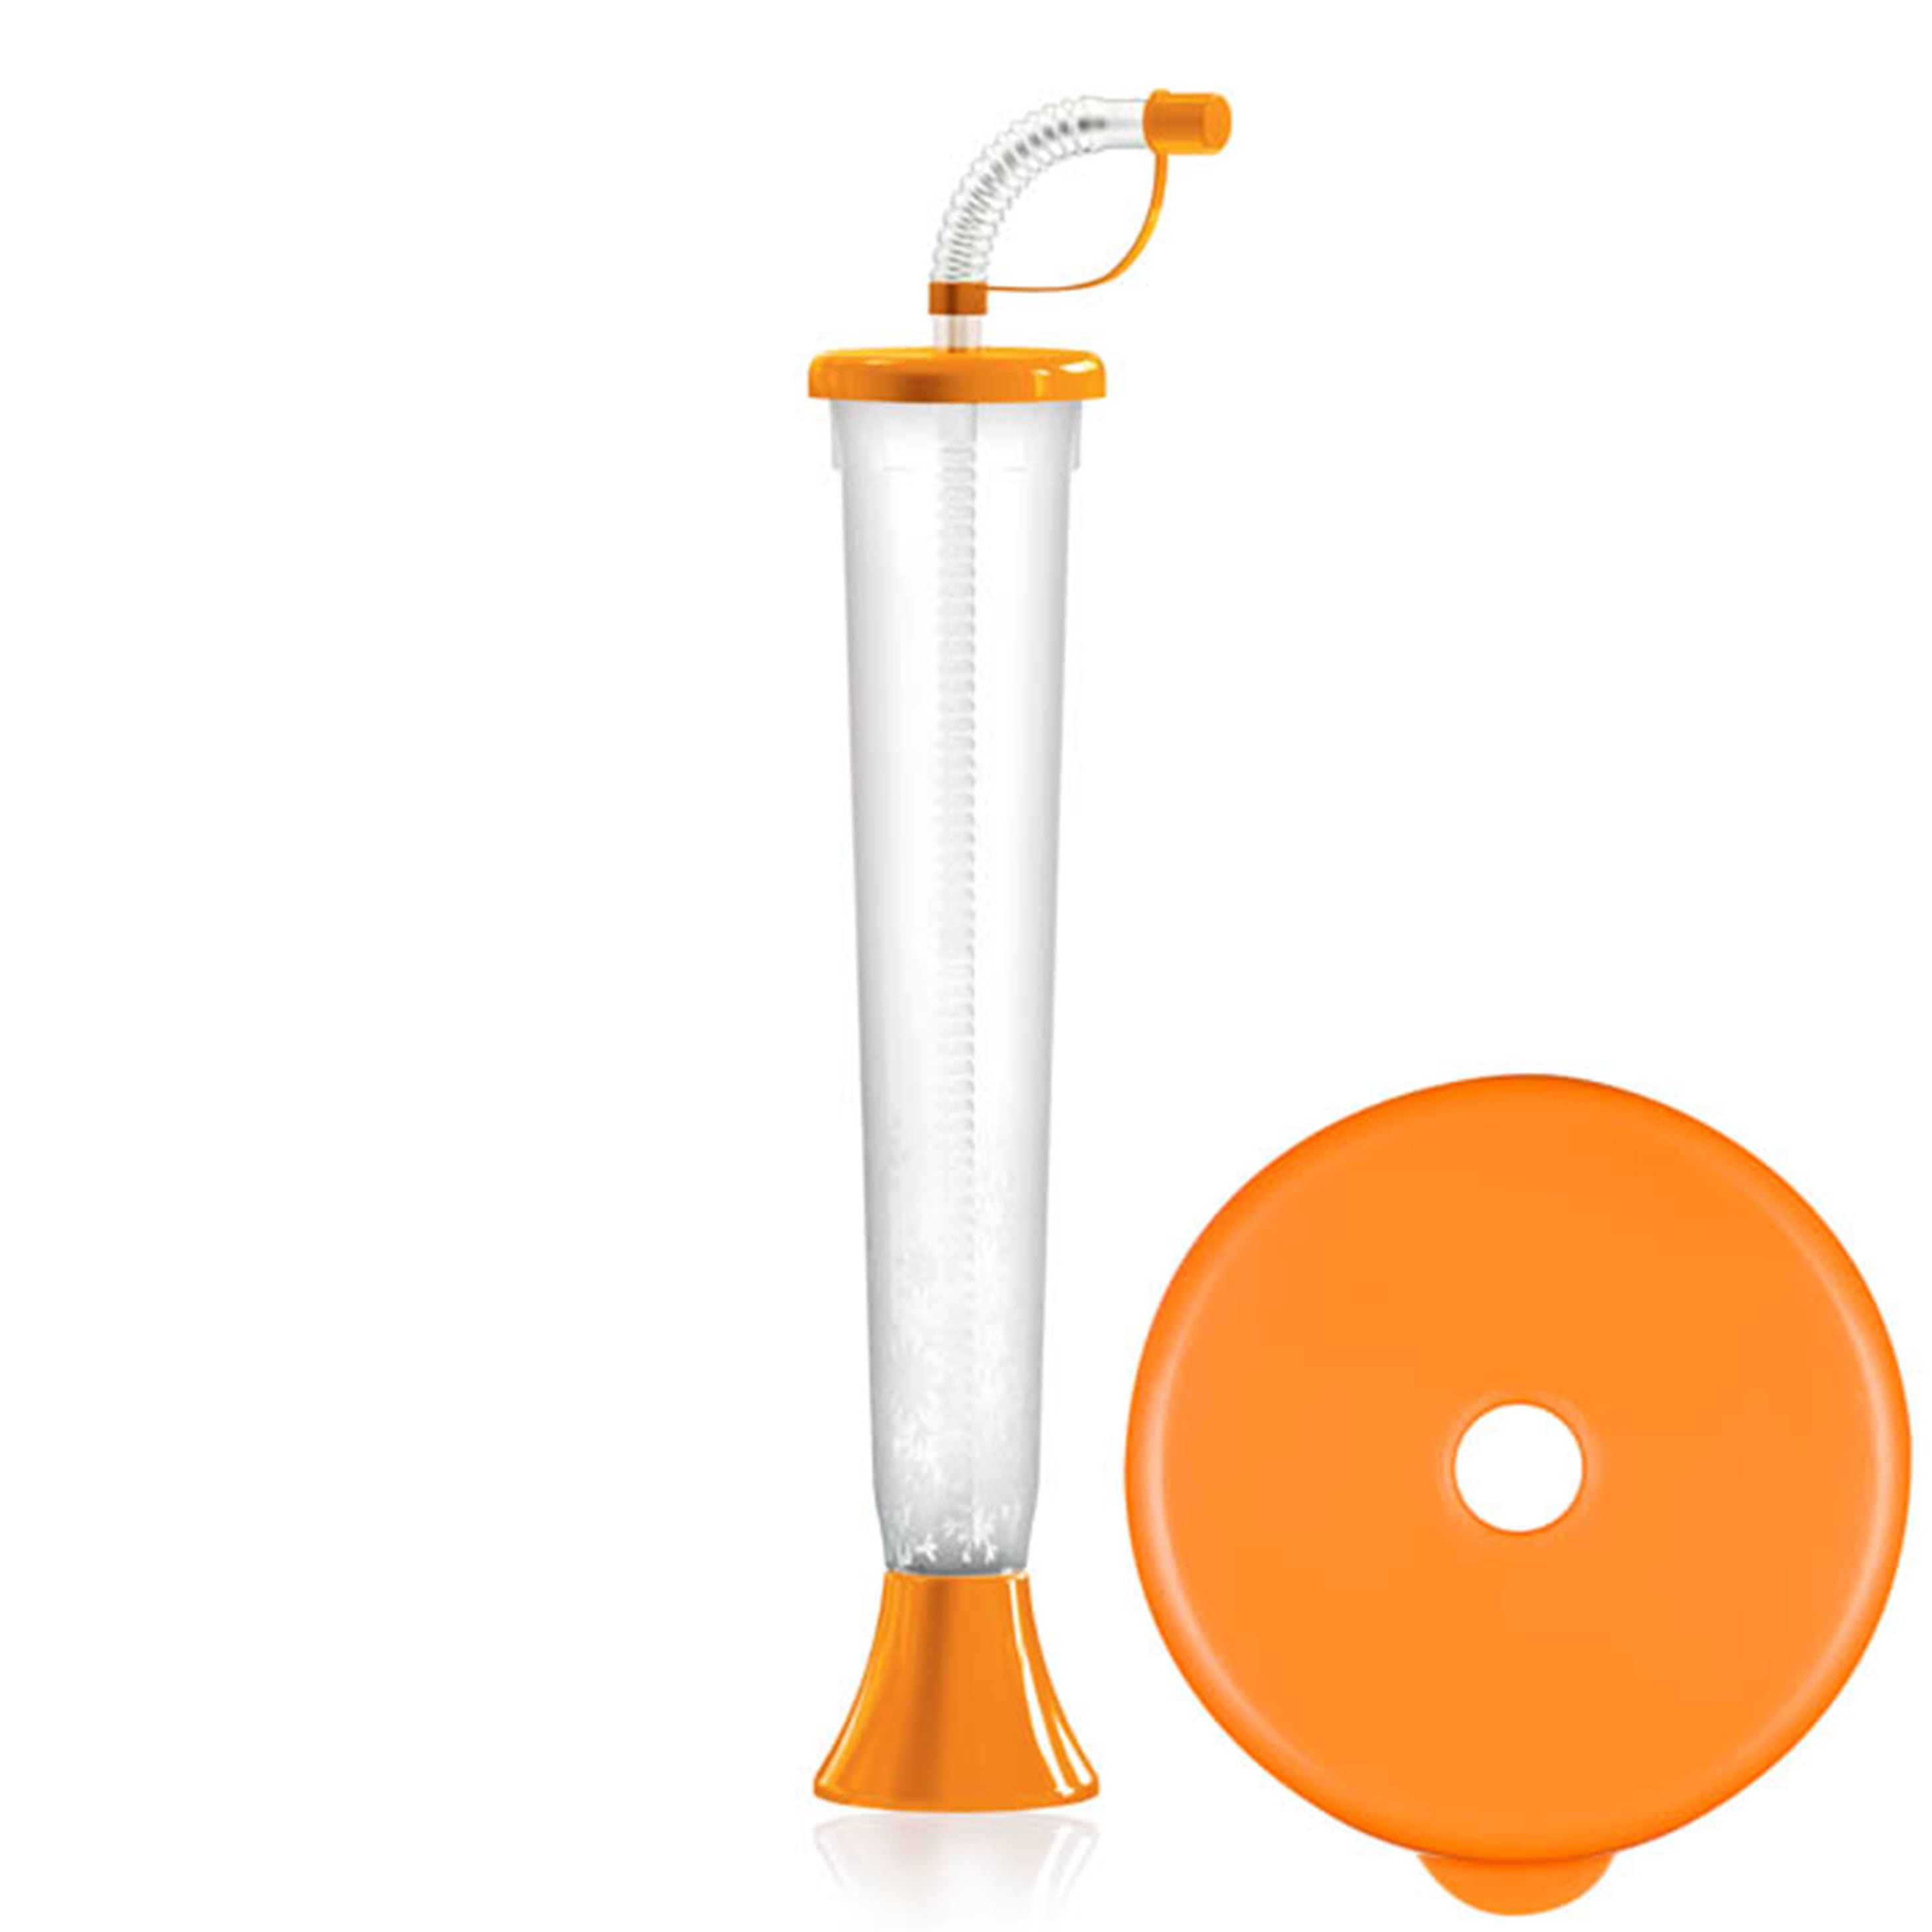 (54 or 108 Cups) Yard Cups with Orange Lids and Straws - 14oz - for Margaritas, Cold Drinks, Frozen Drinks, Kids Party